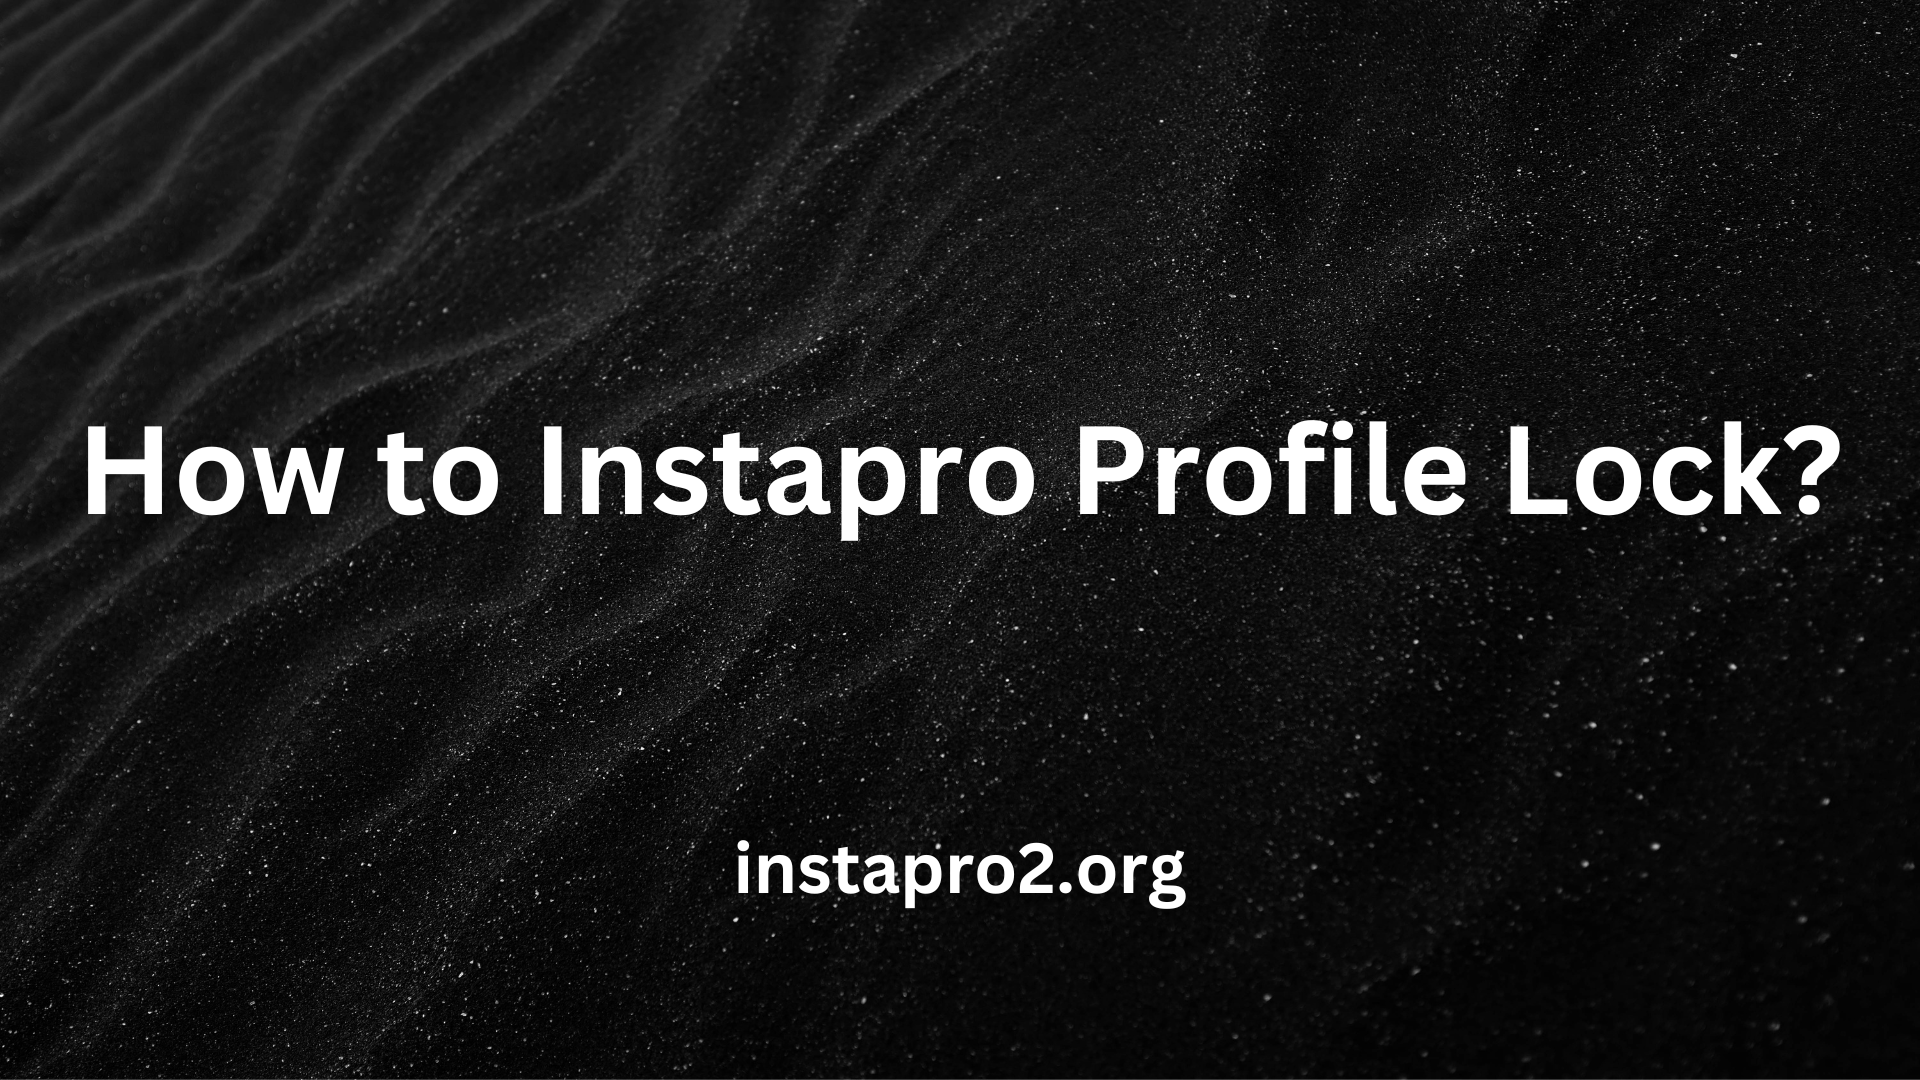 How to Instapro Profile Lock?